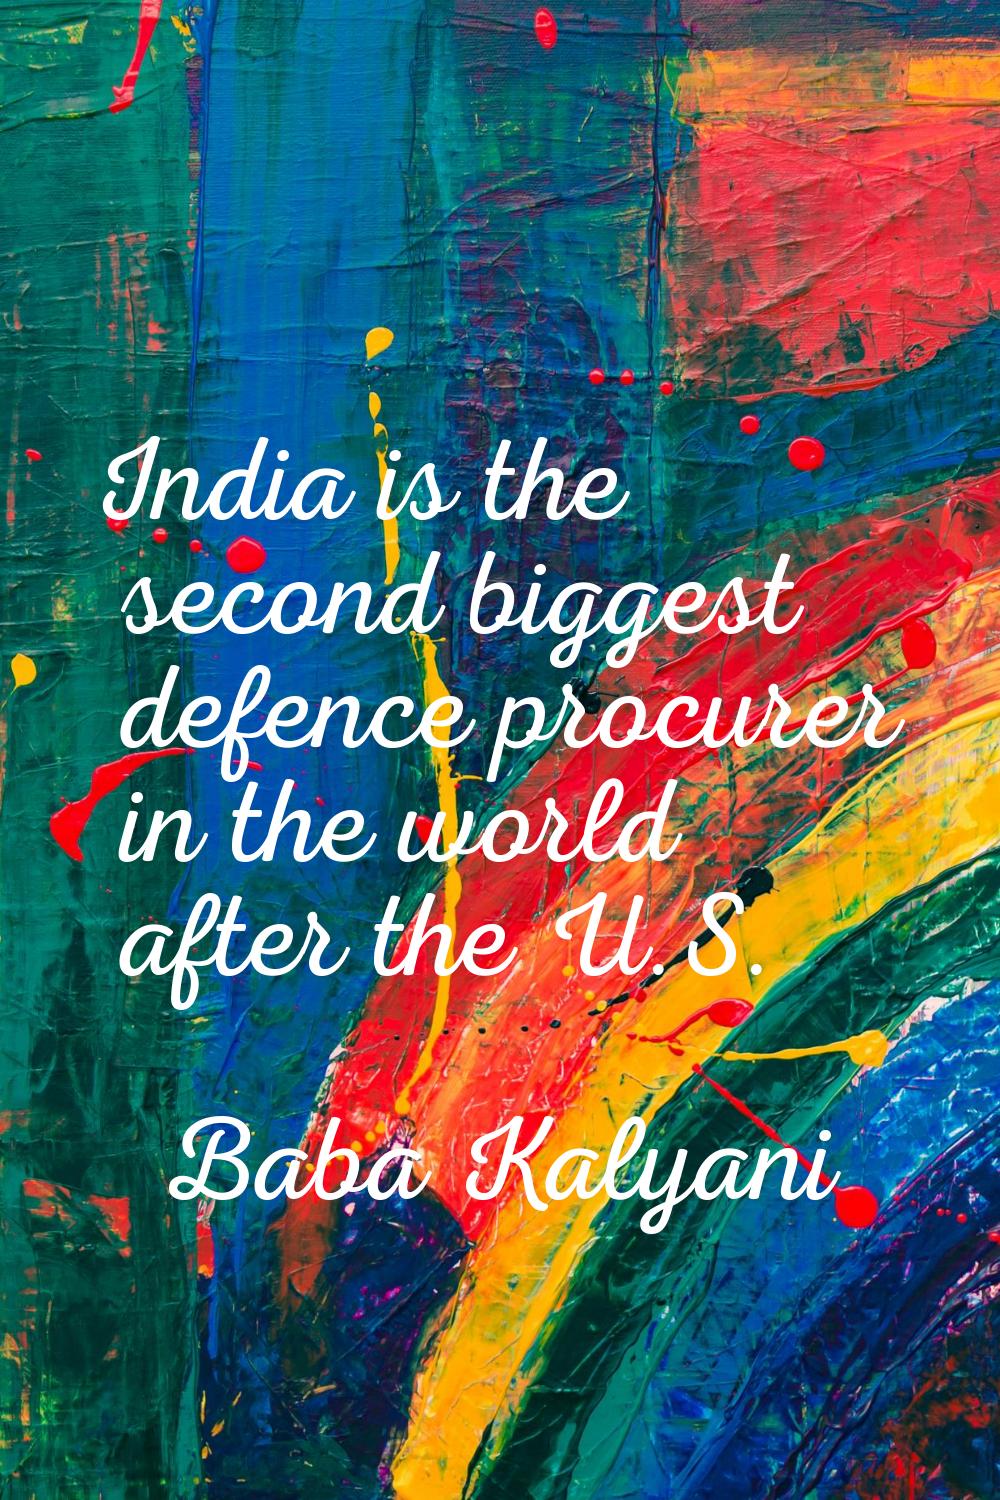 India is the second biggest defence procurer in the world after the U.S.